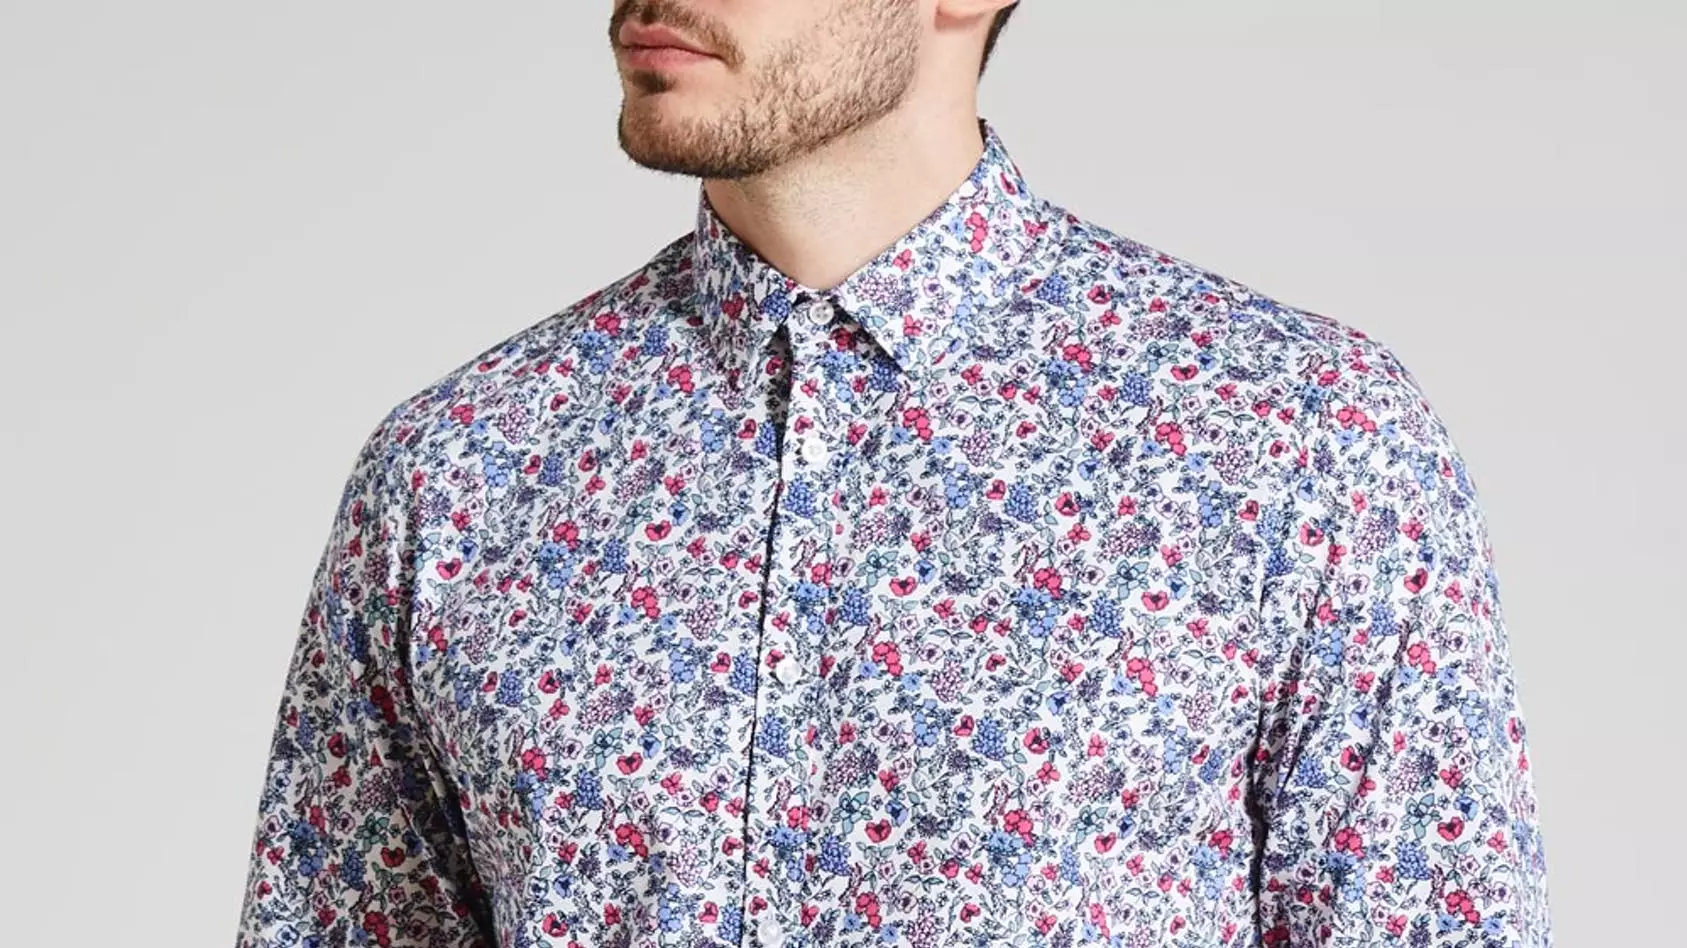 Matalan Is Selling Matching Clothes For Dads And Daughters